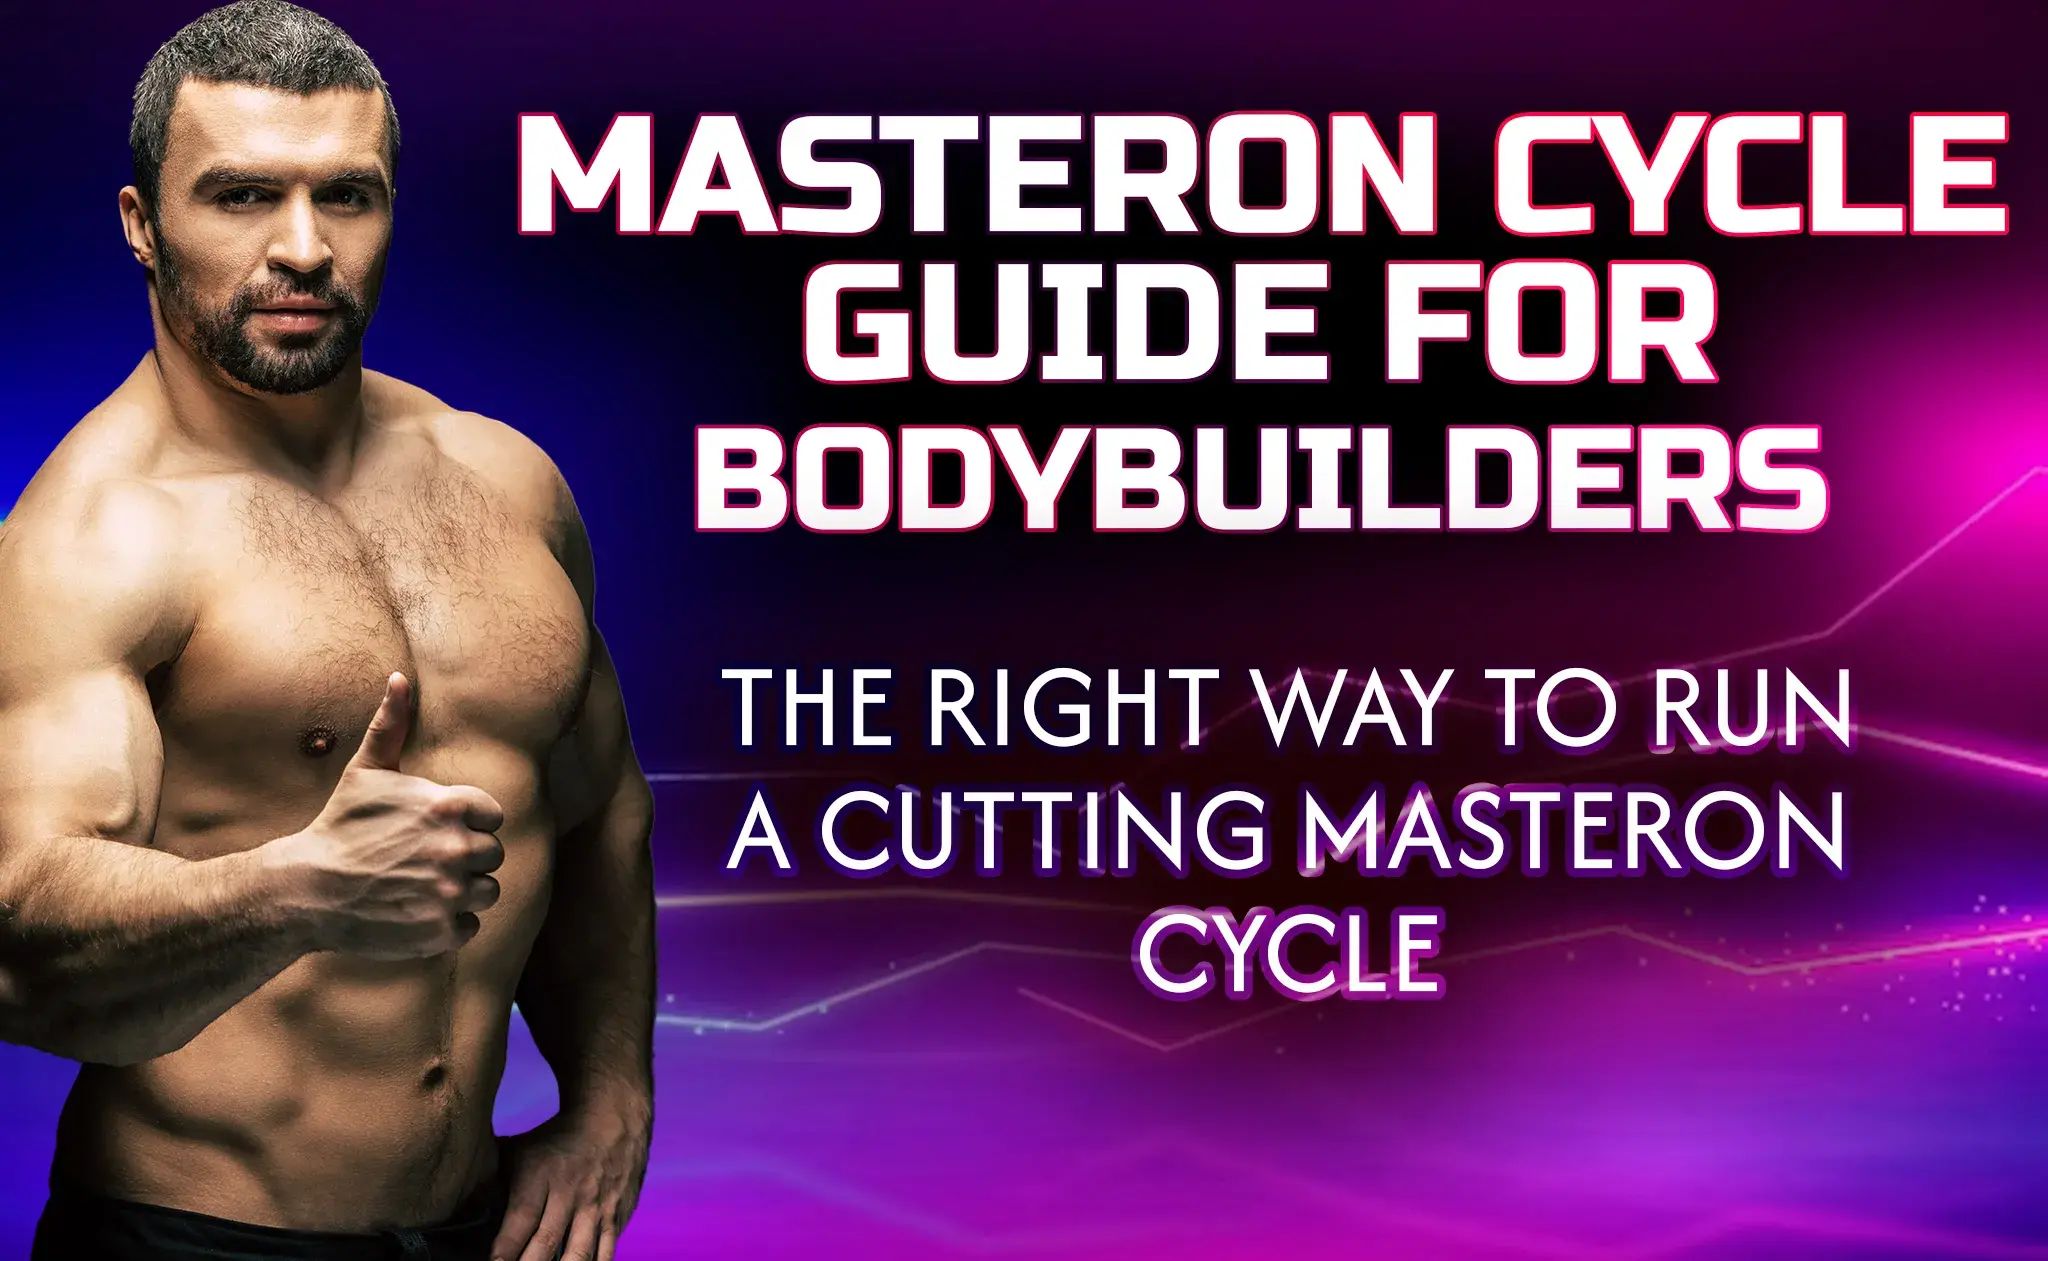 Masteron Cycle Guide for Bodybuilders – The Right Way to Run A Cutting Masteron Cycle